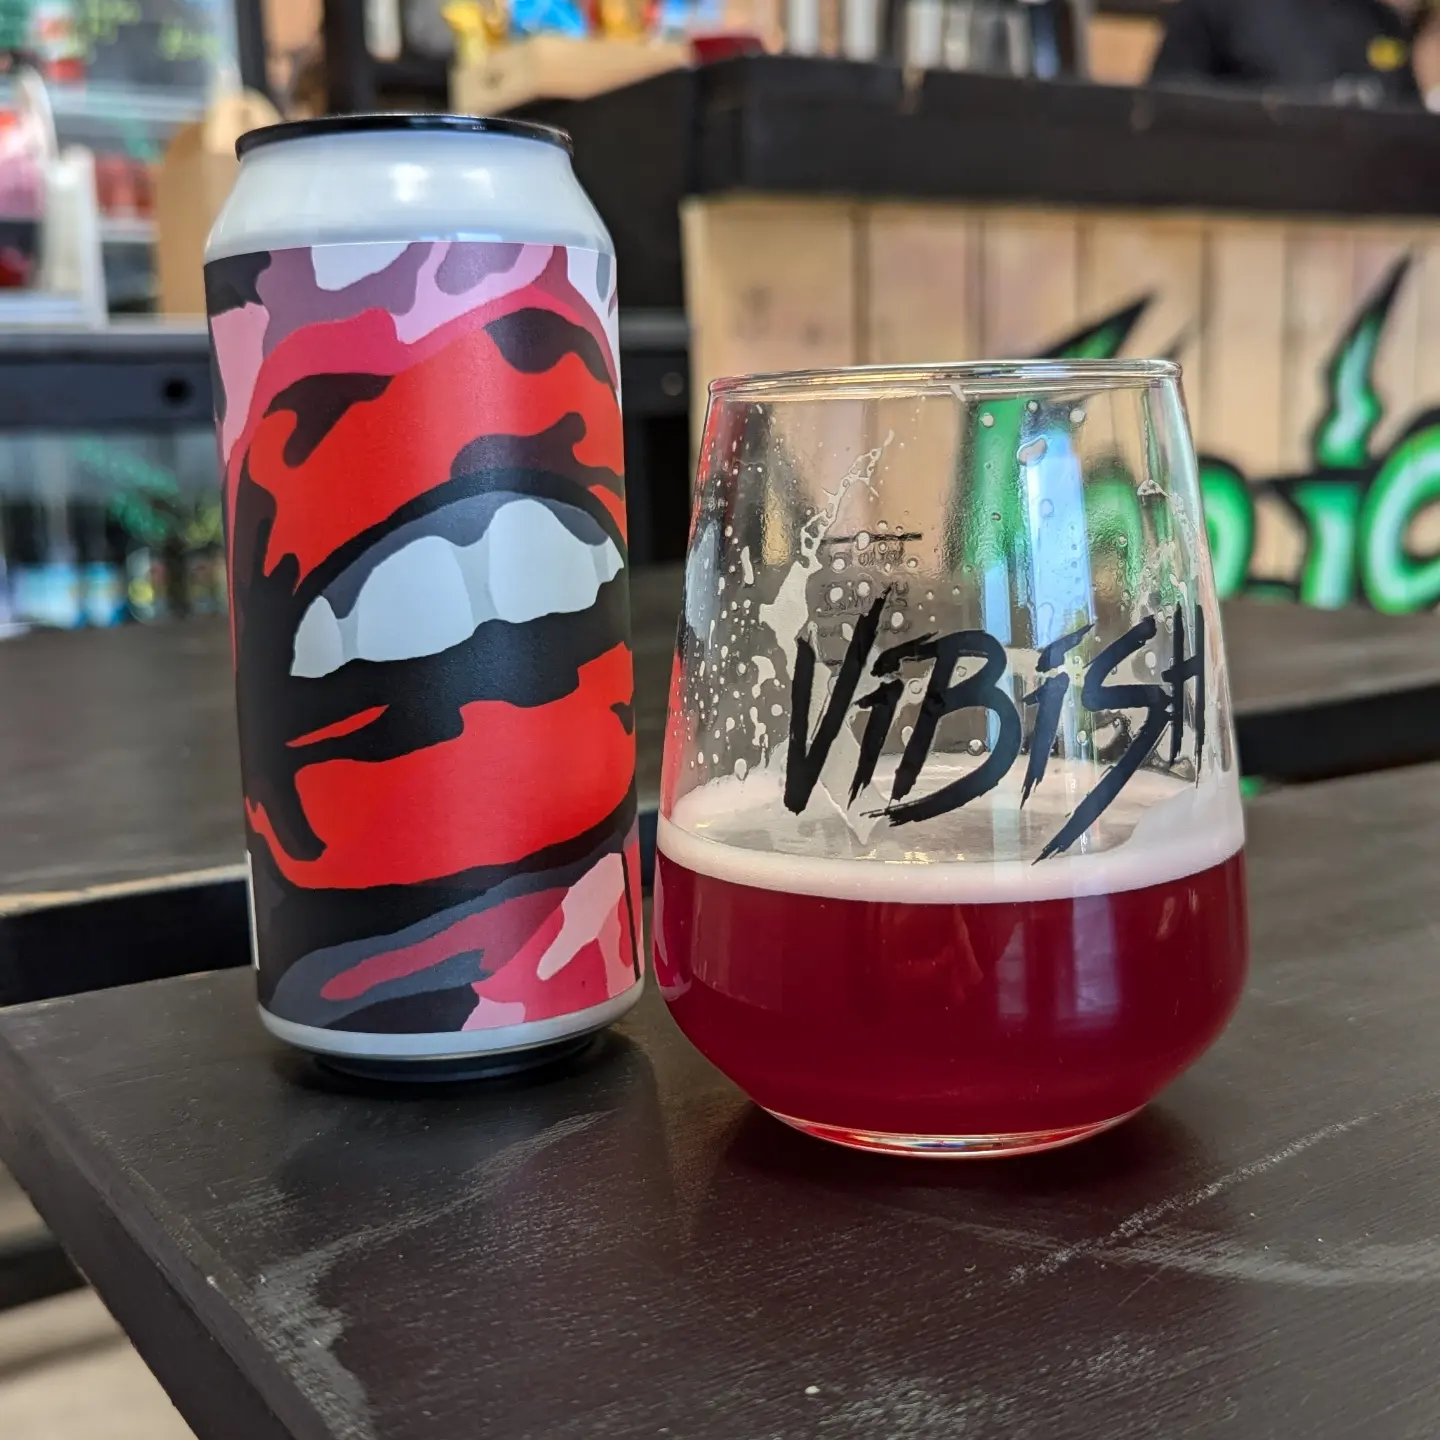 Collaboration with Vibish Brewing